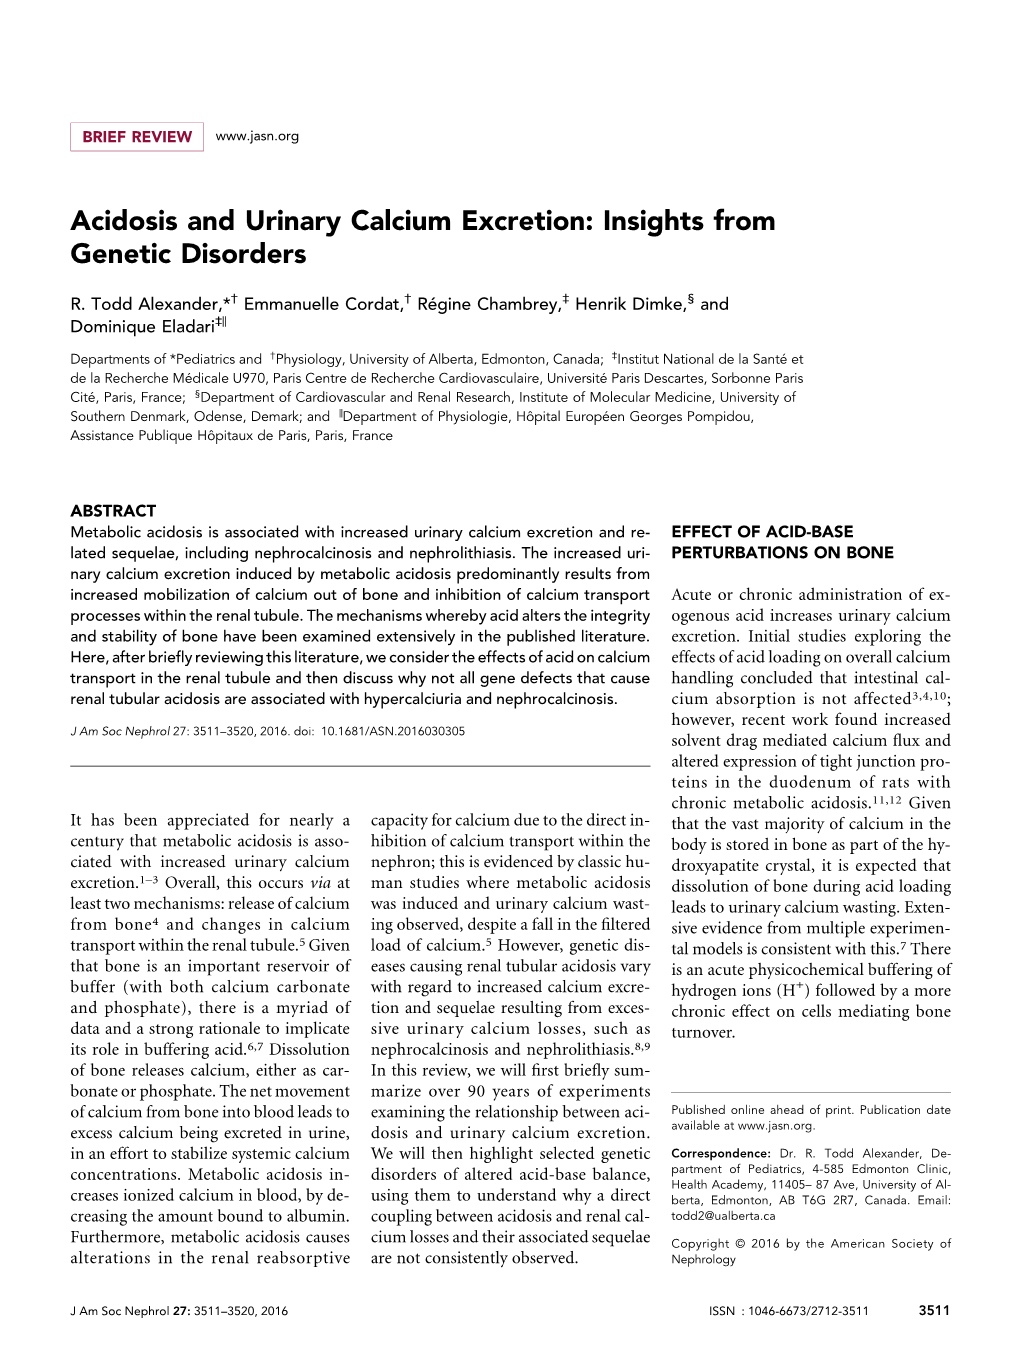 Acidosis and Urinary Calcium Excretion: Insights from Genetic Disorders